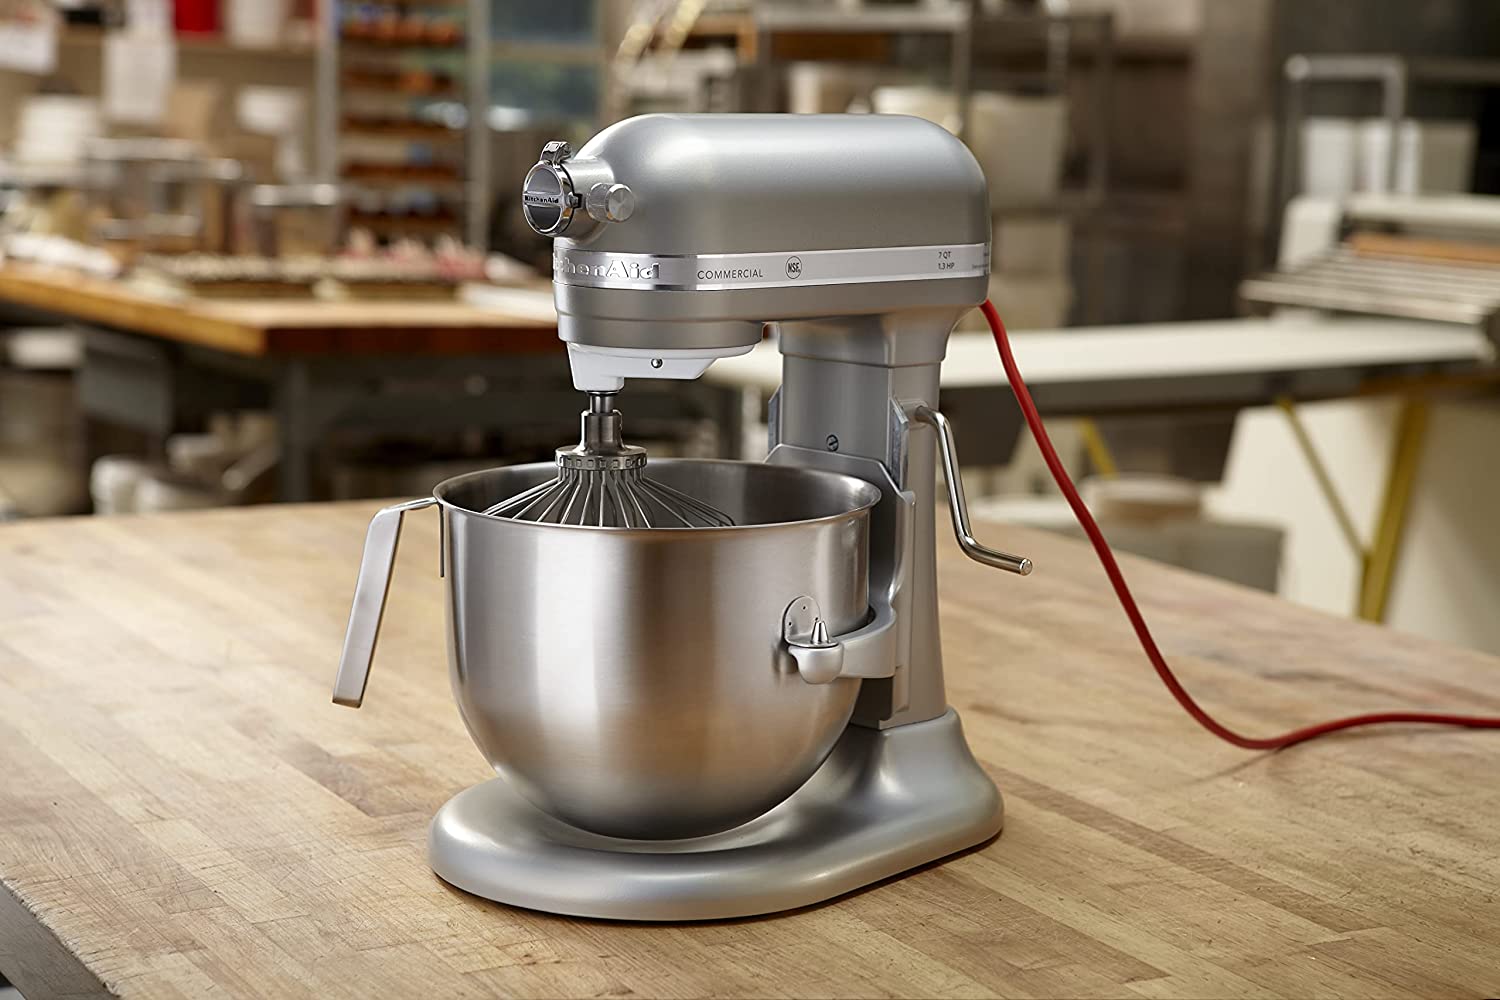 Commercial 8 Qt Stand Mixer (NSF Certified) - White, KitchenAid